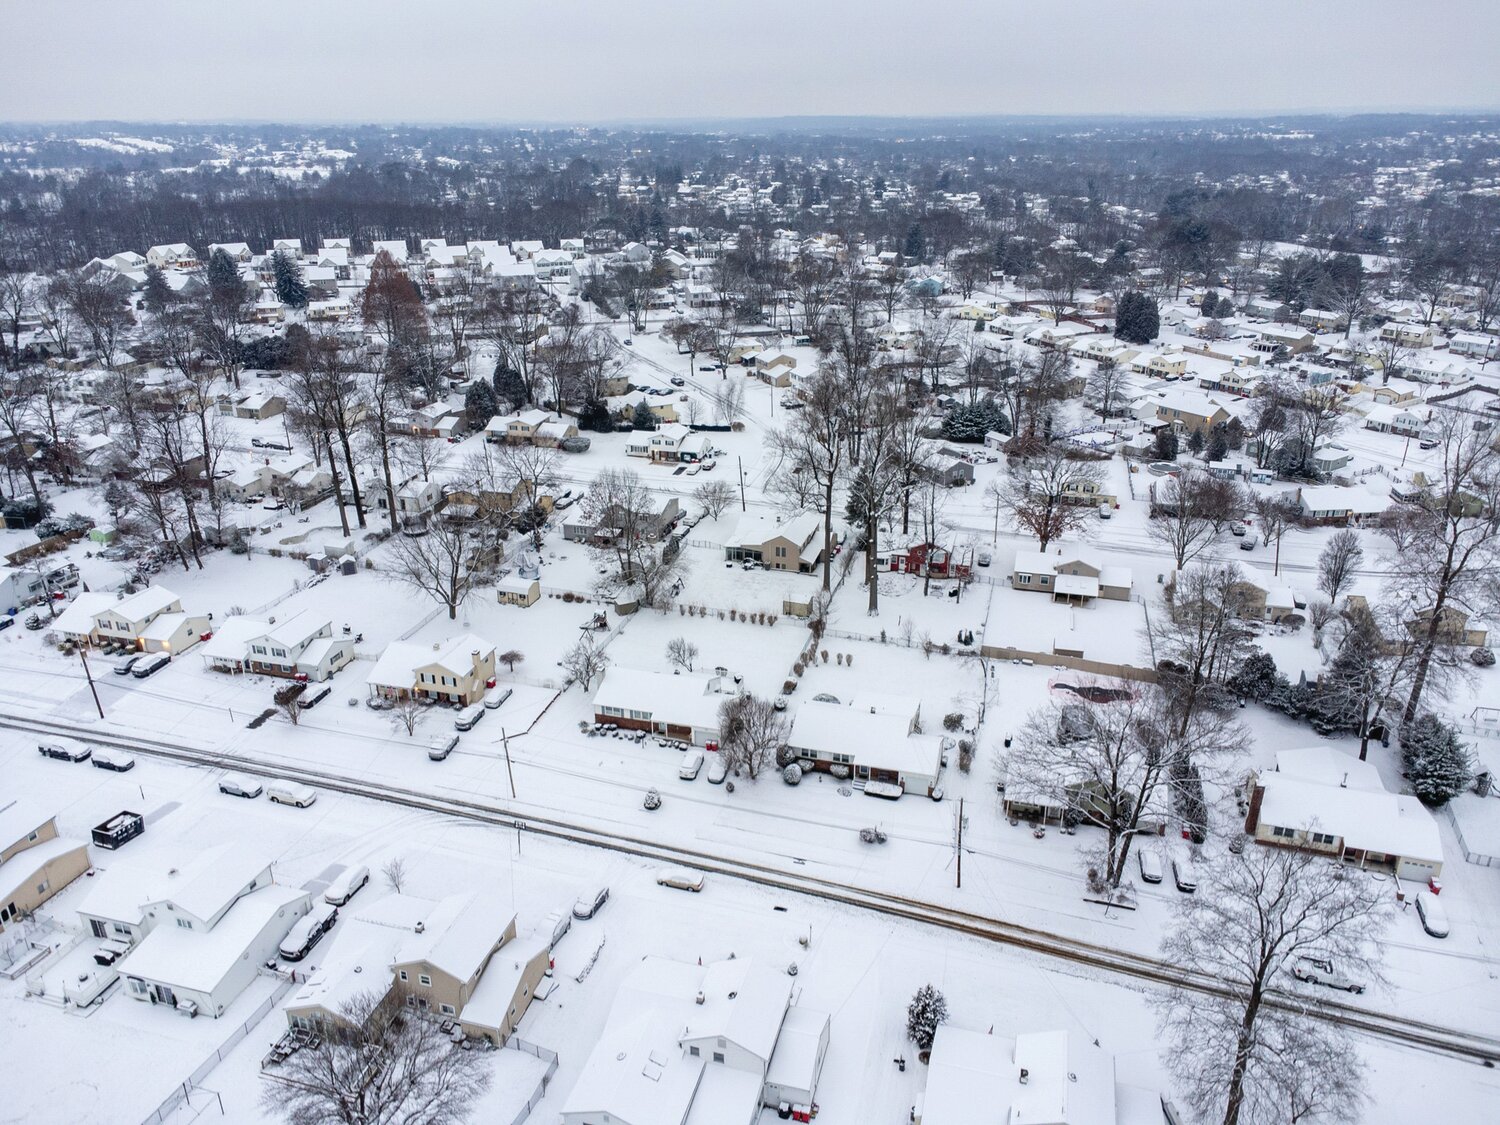 A drone captures the impact of this week’s winter storm on the Hartsville section of Warminster Township. Snow fell Monday night into Tuesday morning and totaled 2 to 4 inches, locally. There’s a chance we’ll see more of the white stuff Friday. For more snowy scenery, visit www.buckscountyherald.com.